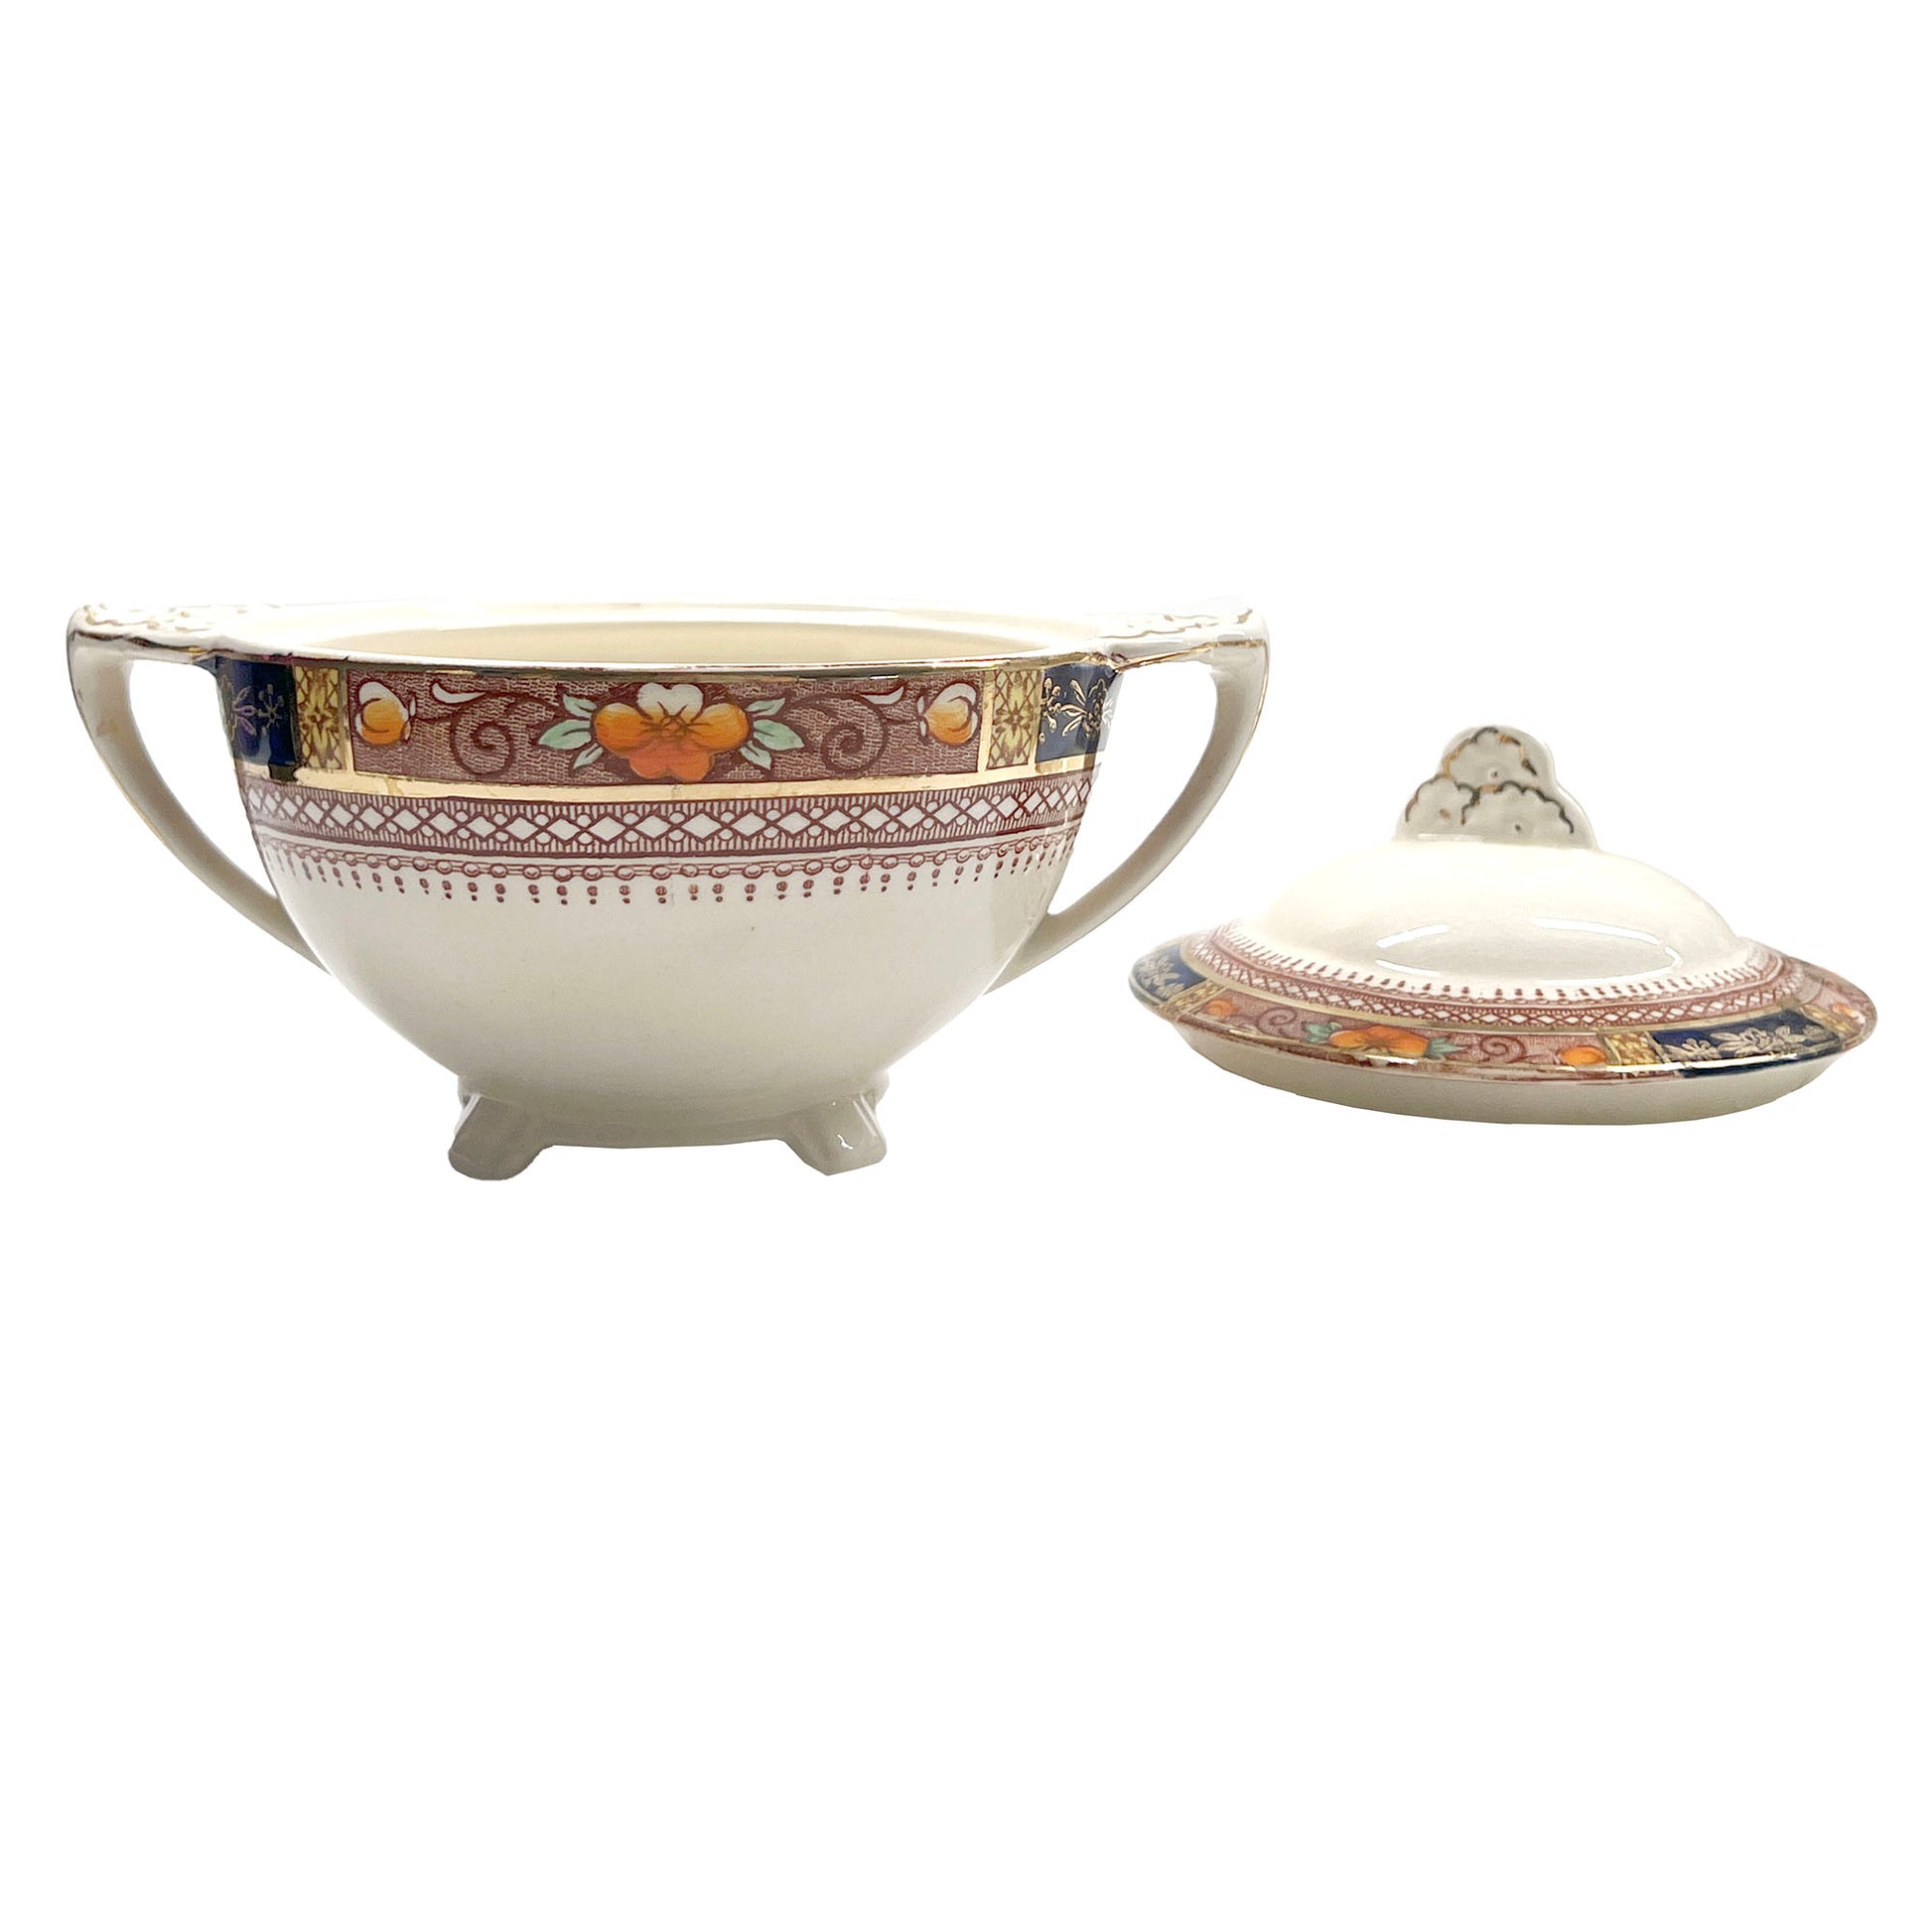 Queen-Mary-SOL-Covered-China-Sugar-Bowl.-Open-view.-Shop-eBargainsAndDeals.com.